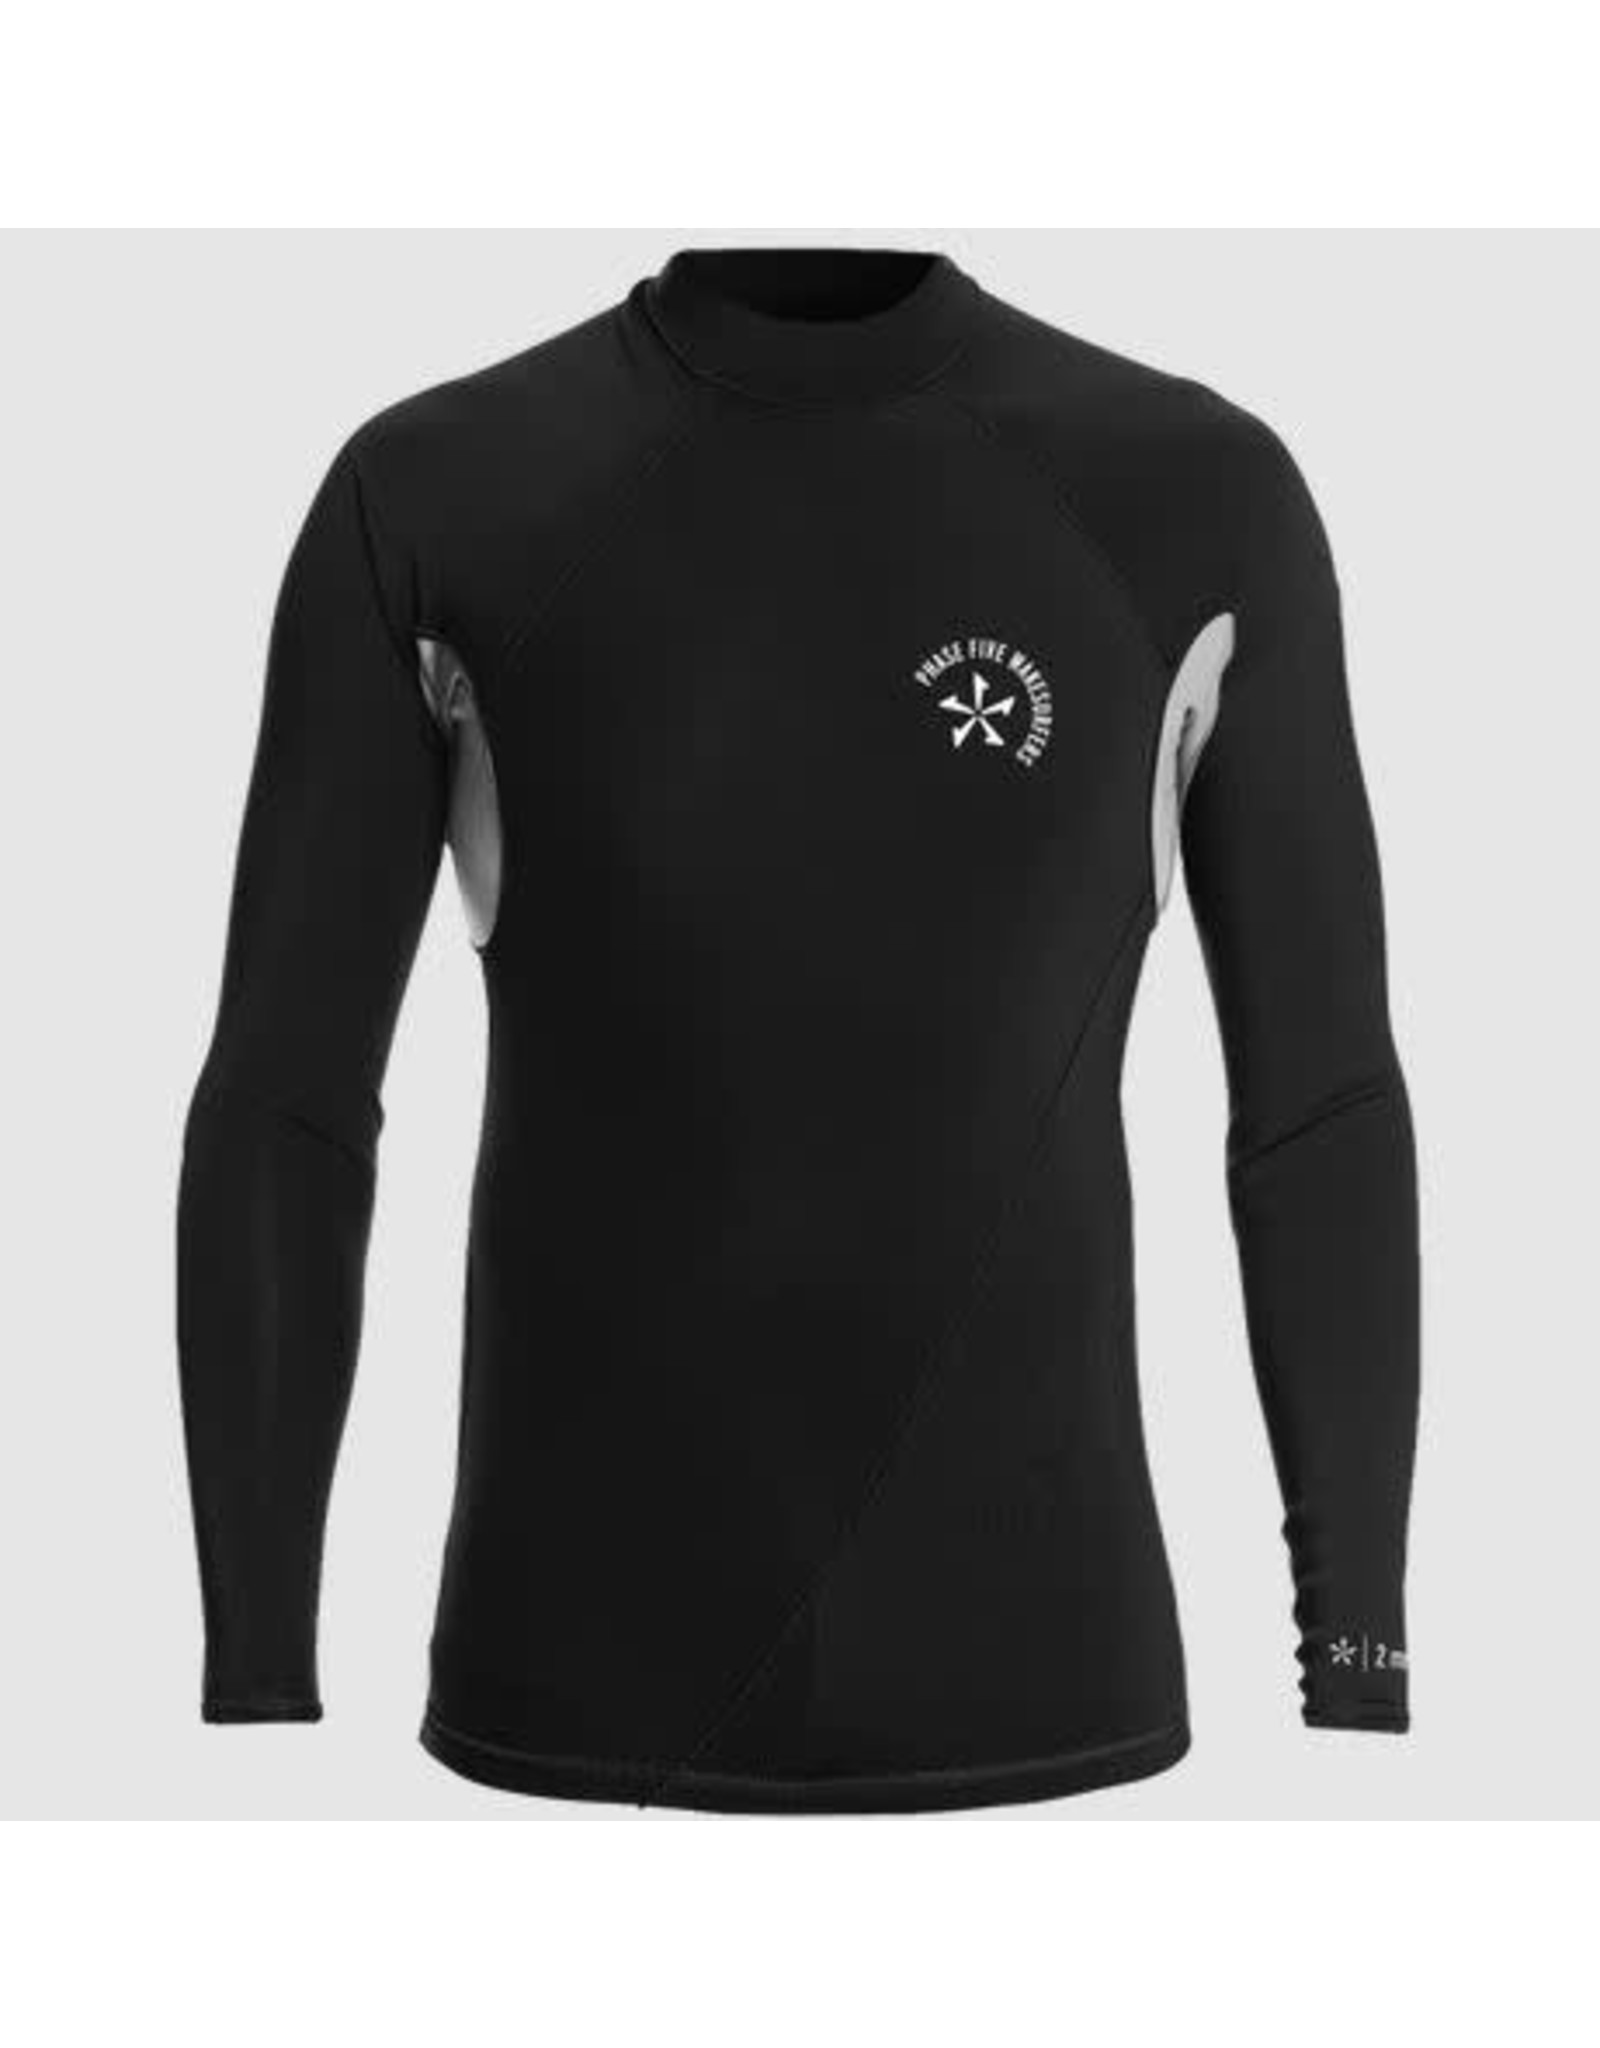 Phase Five P5 Wetsuit Top